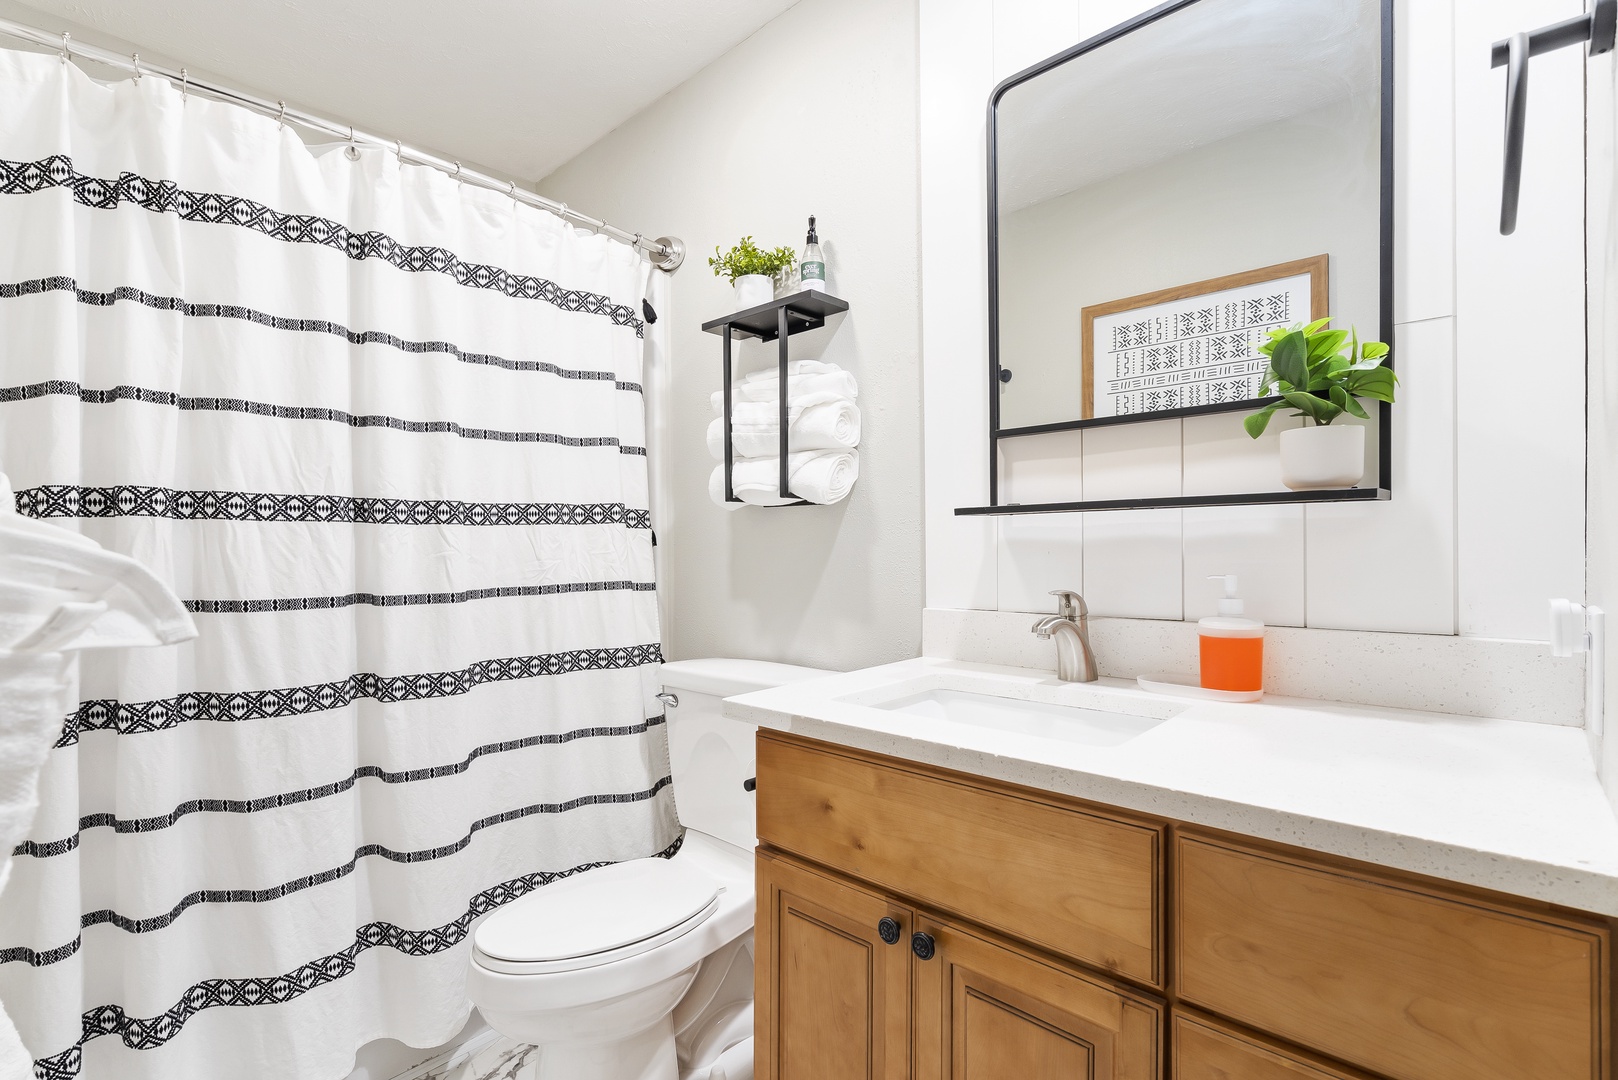 This full bathroom includes a spacious single vanity & shower/tub combo